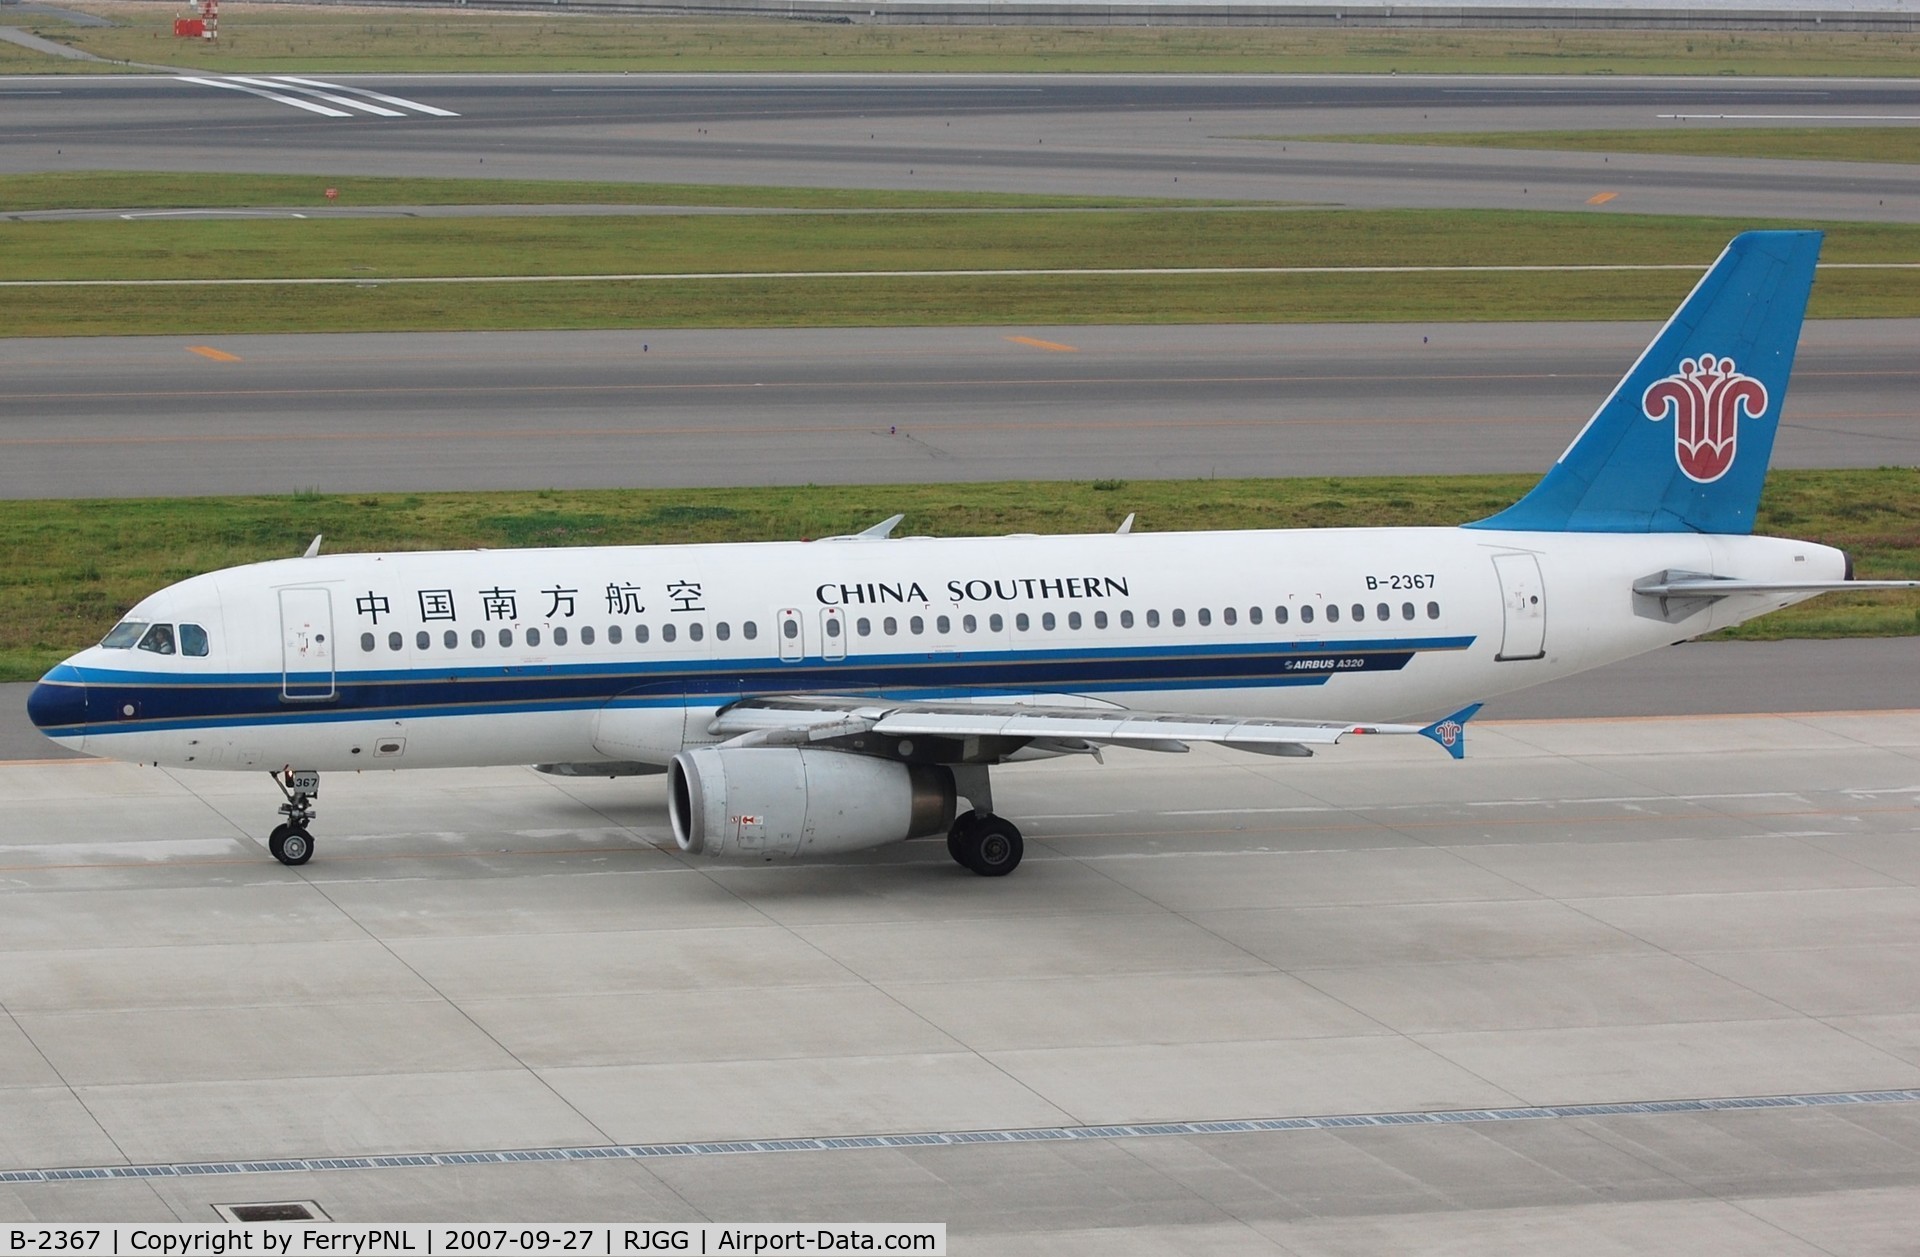 B-2367, 1998 Airbus A320-232 C/N 881, China Southern A320 in NGO